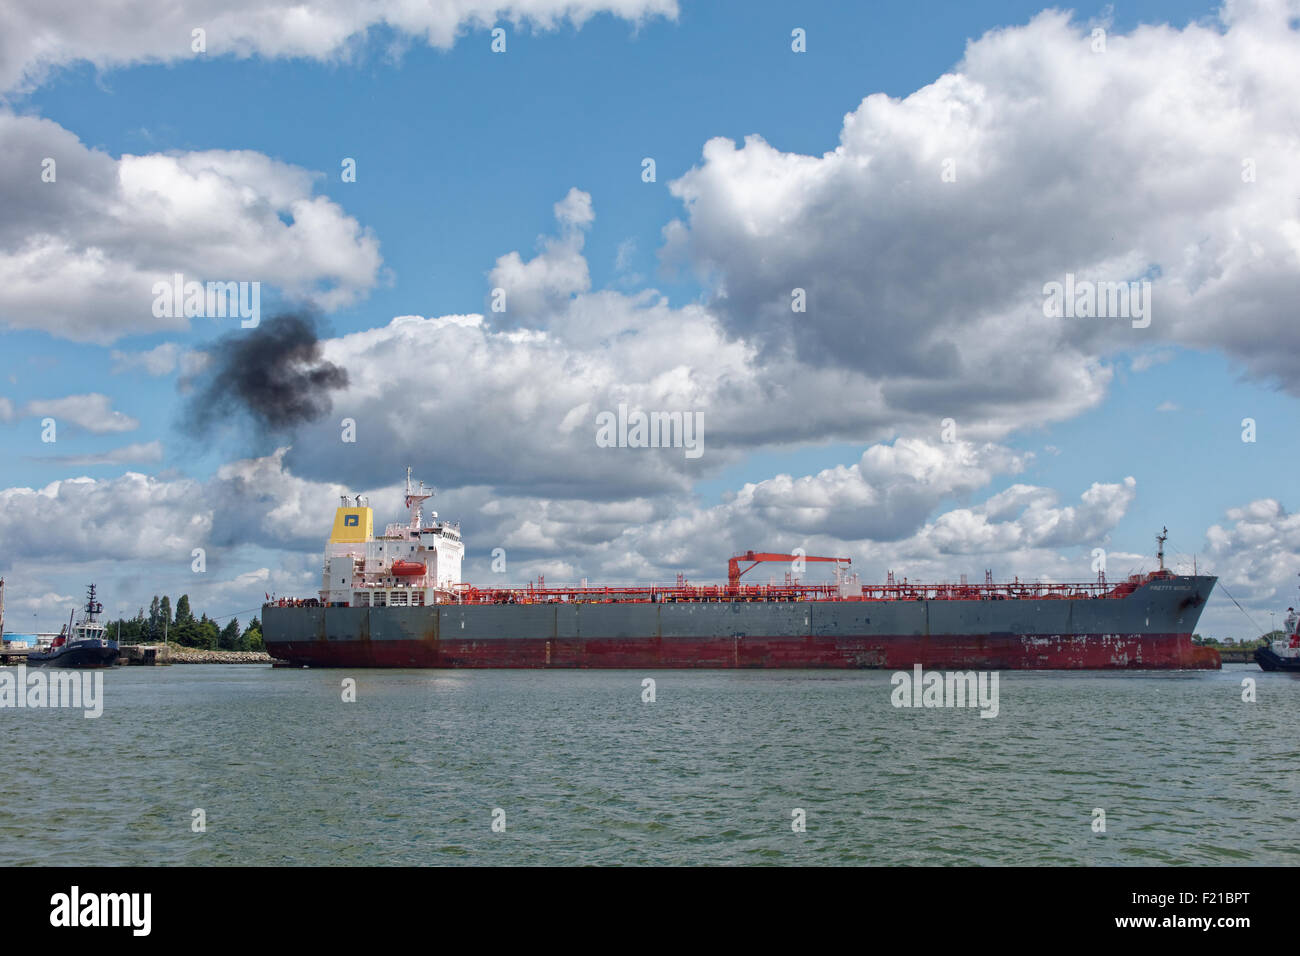 Tanker and Tug boat Stock Photo